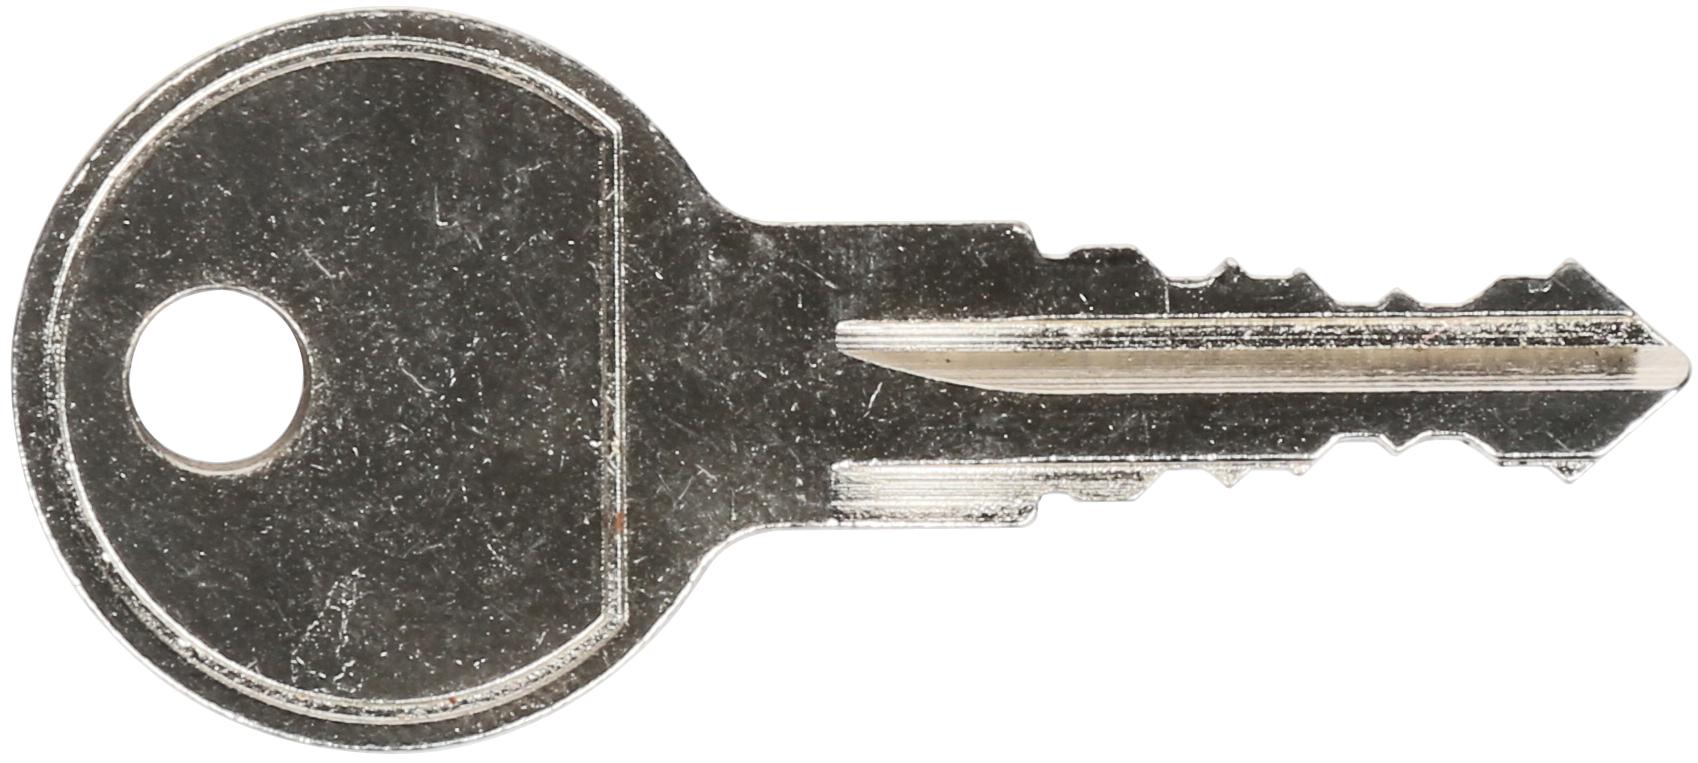 Spare Roof Box Key 192